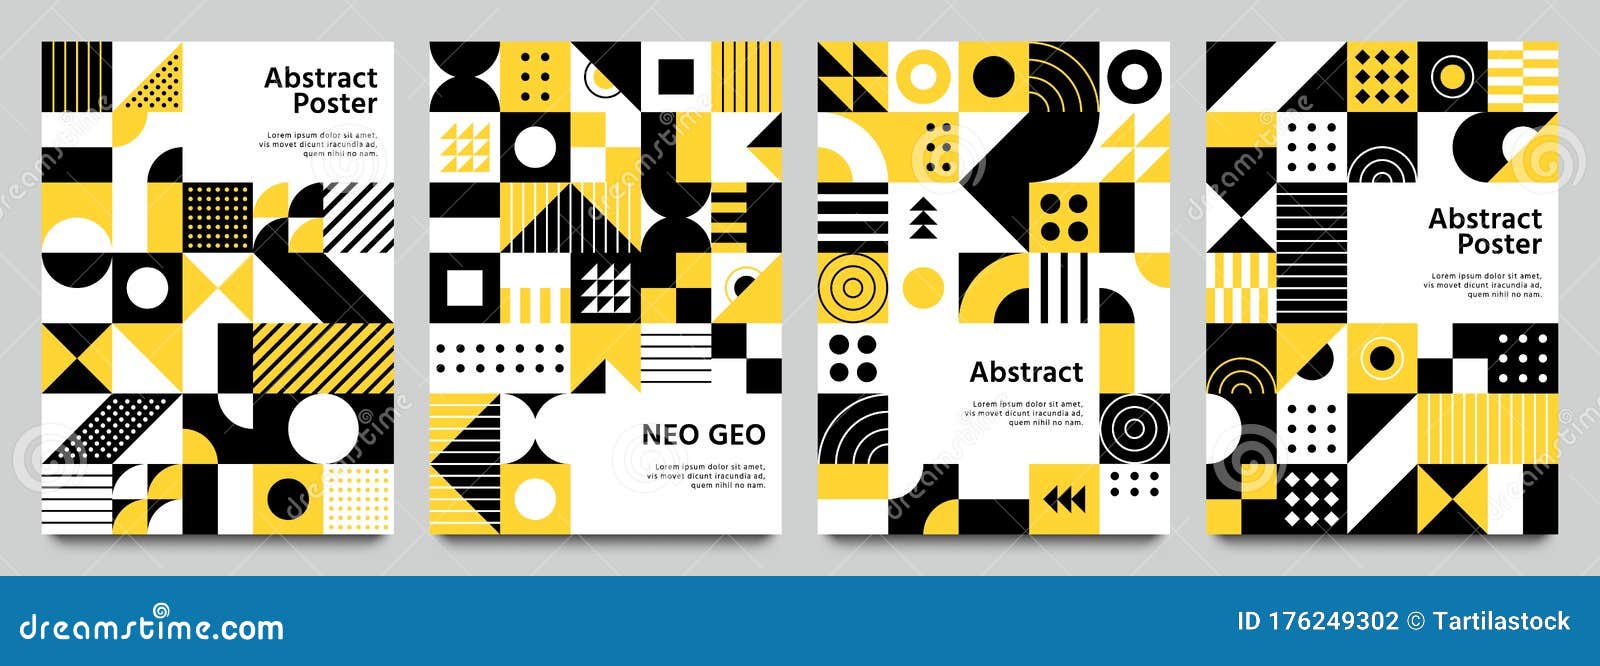 neo geometric posters. modern grid pattern with geometrical s. abstract yellow, white and black backgrounds 